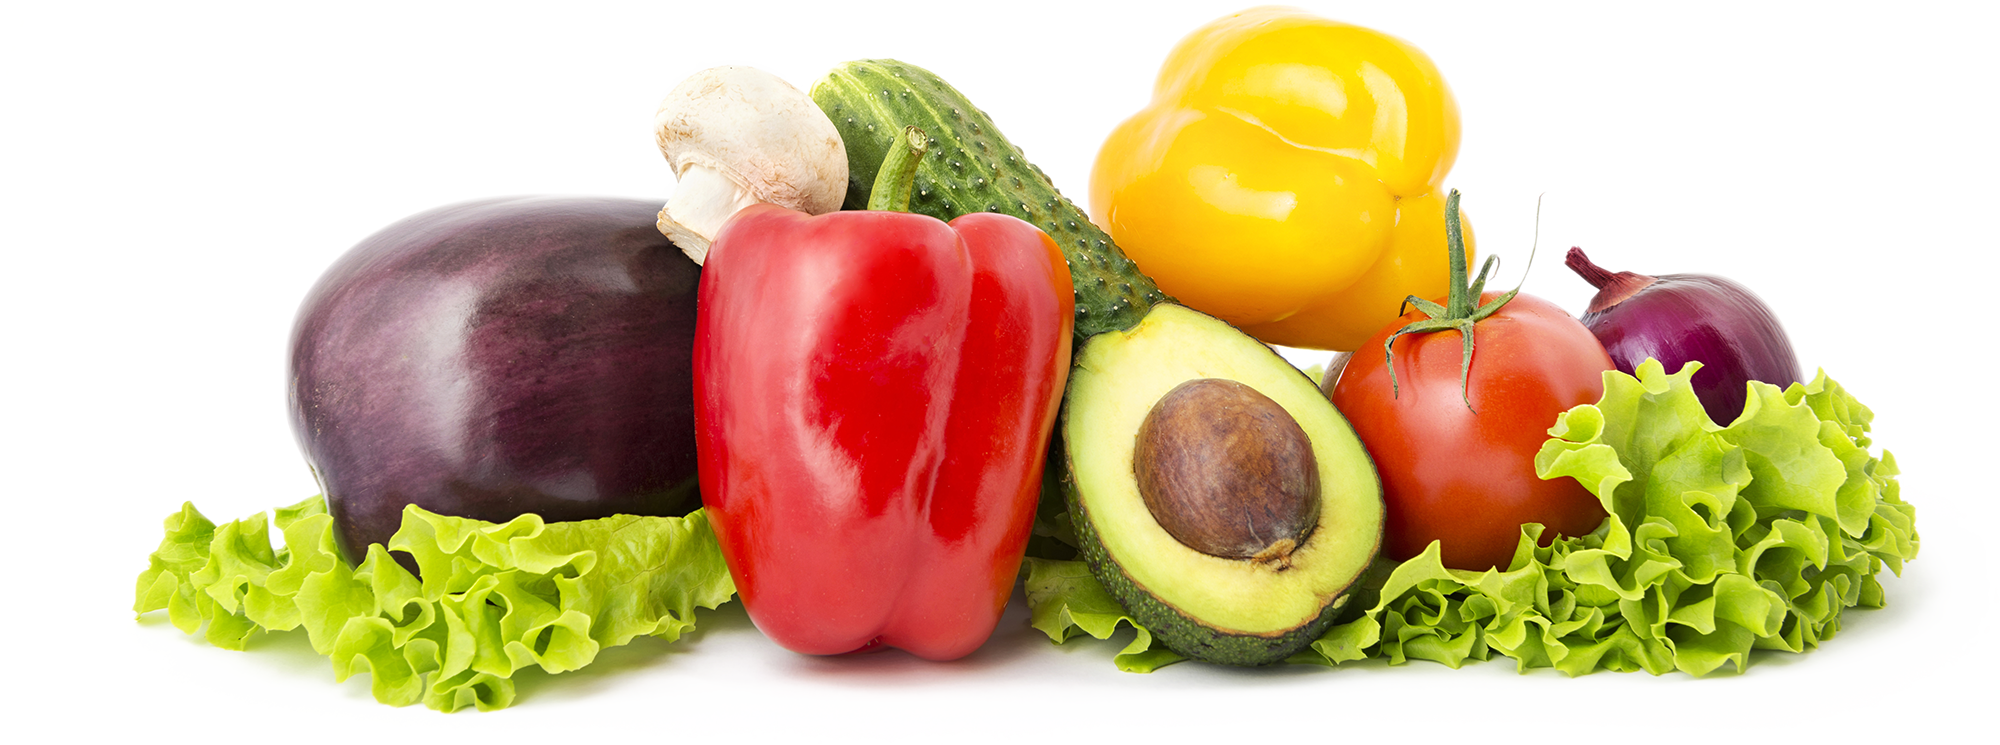 Healthy Food PNG Images Transparent Background | PNG Play